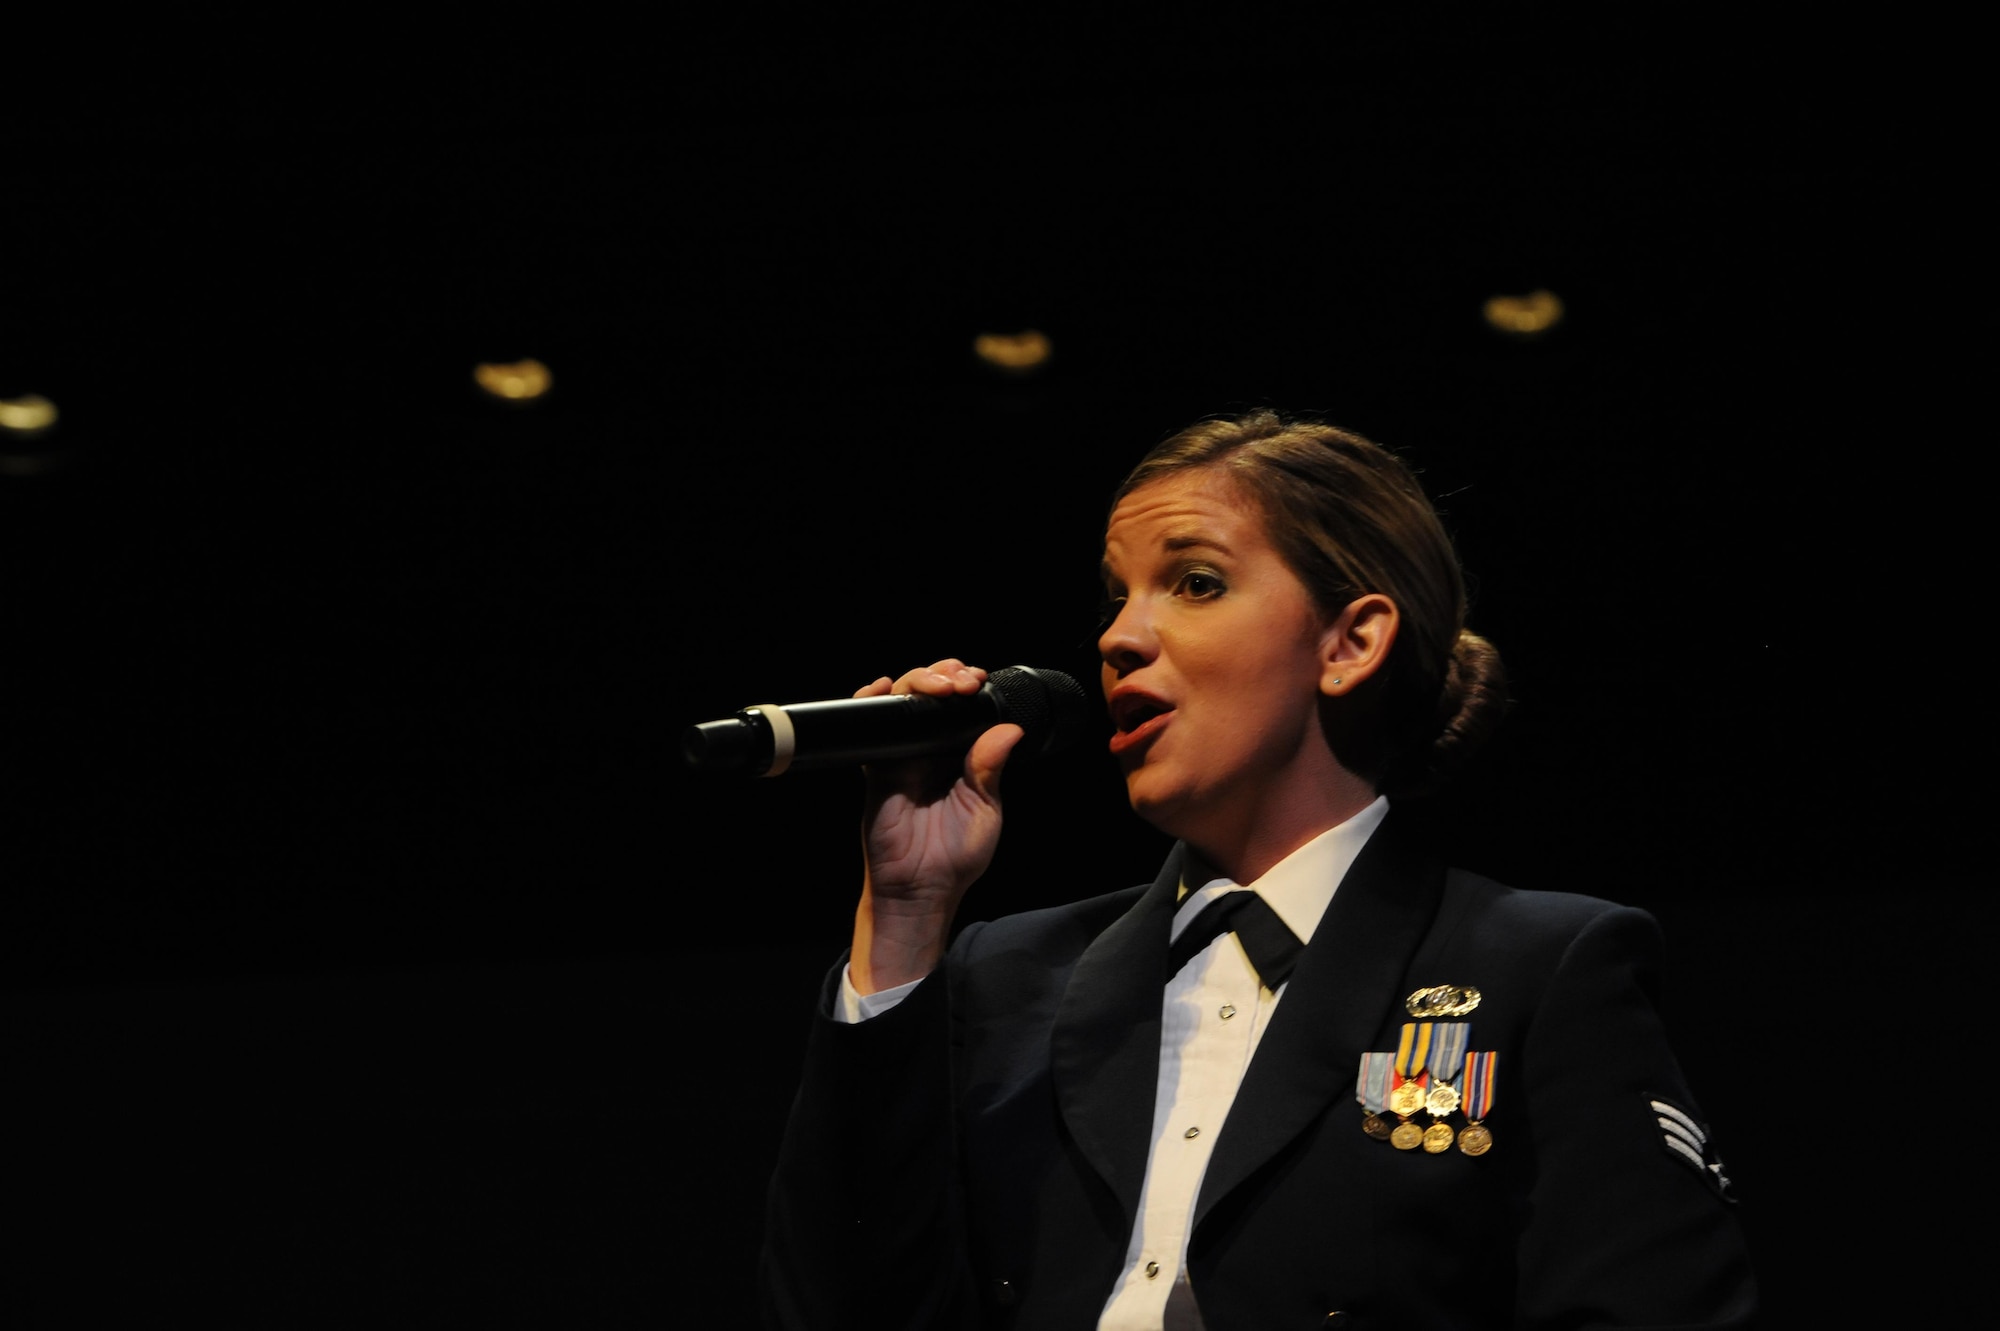 Senior Airman Melissa Lackore, U.S. Air Force Heritage of America Band vocalist, sings “At Last” during a USAF HOAB 75th Anniversary Band Concert at the Ferguson Center for the Arts in Newport News, Va., Oct. 1, 2016. Prior to joining the Air Force, SrA Lackore taught K-12 vocal music in the Iowa public school system, as well as, High School vocal, instrumental music and music theory in Nebraska Catholic schools. (U.S. Air Force photo by Staff Sgt. Nick Wilson)